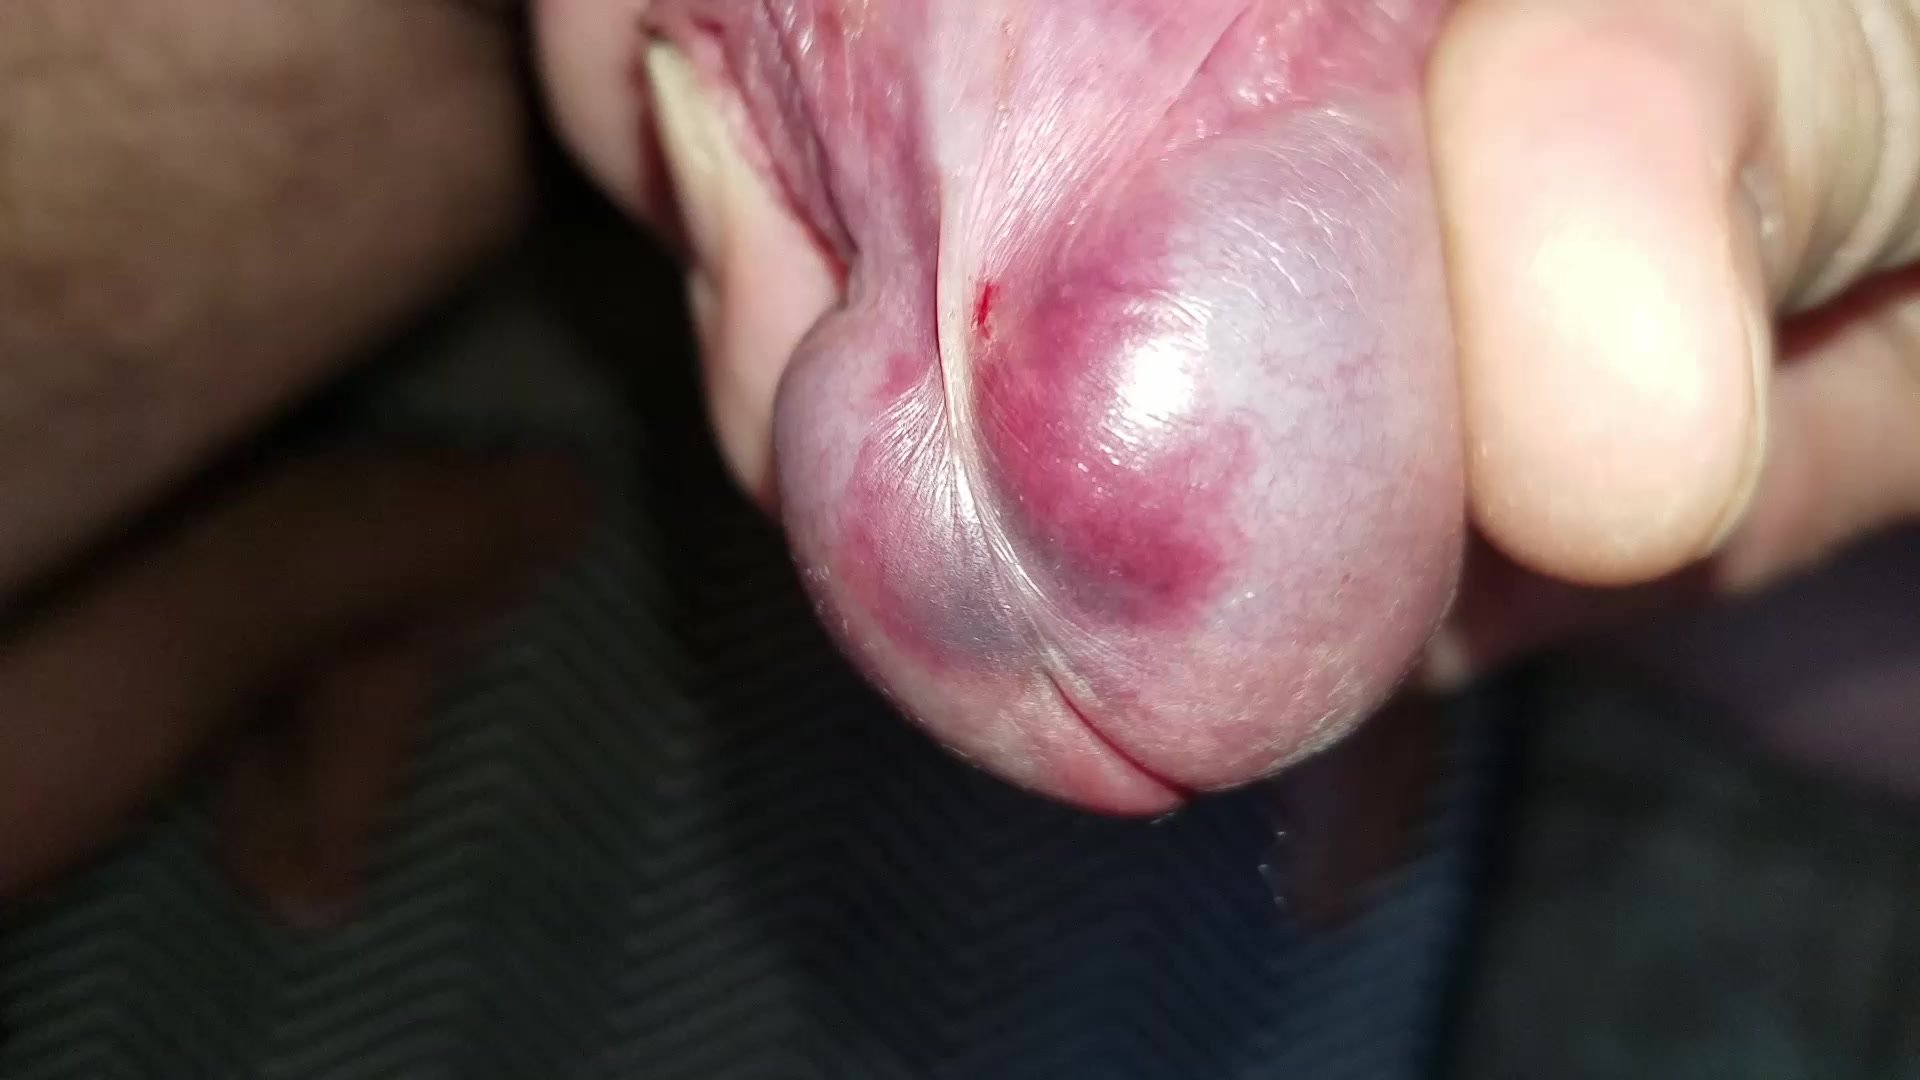 My first masturbation 5 hours after pulling the nails